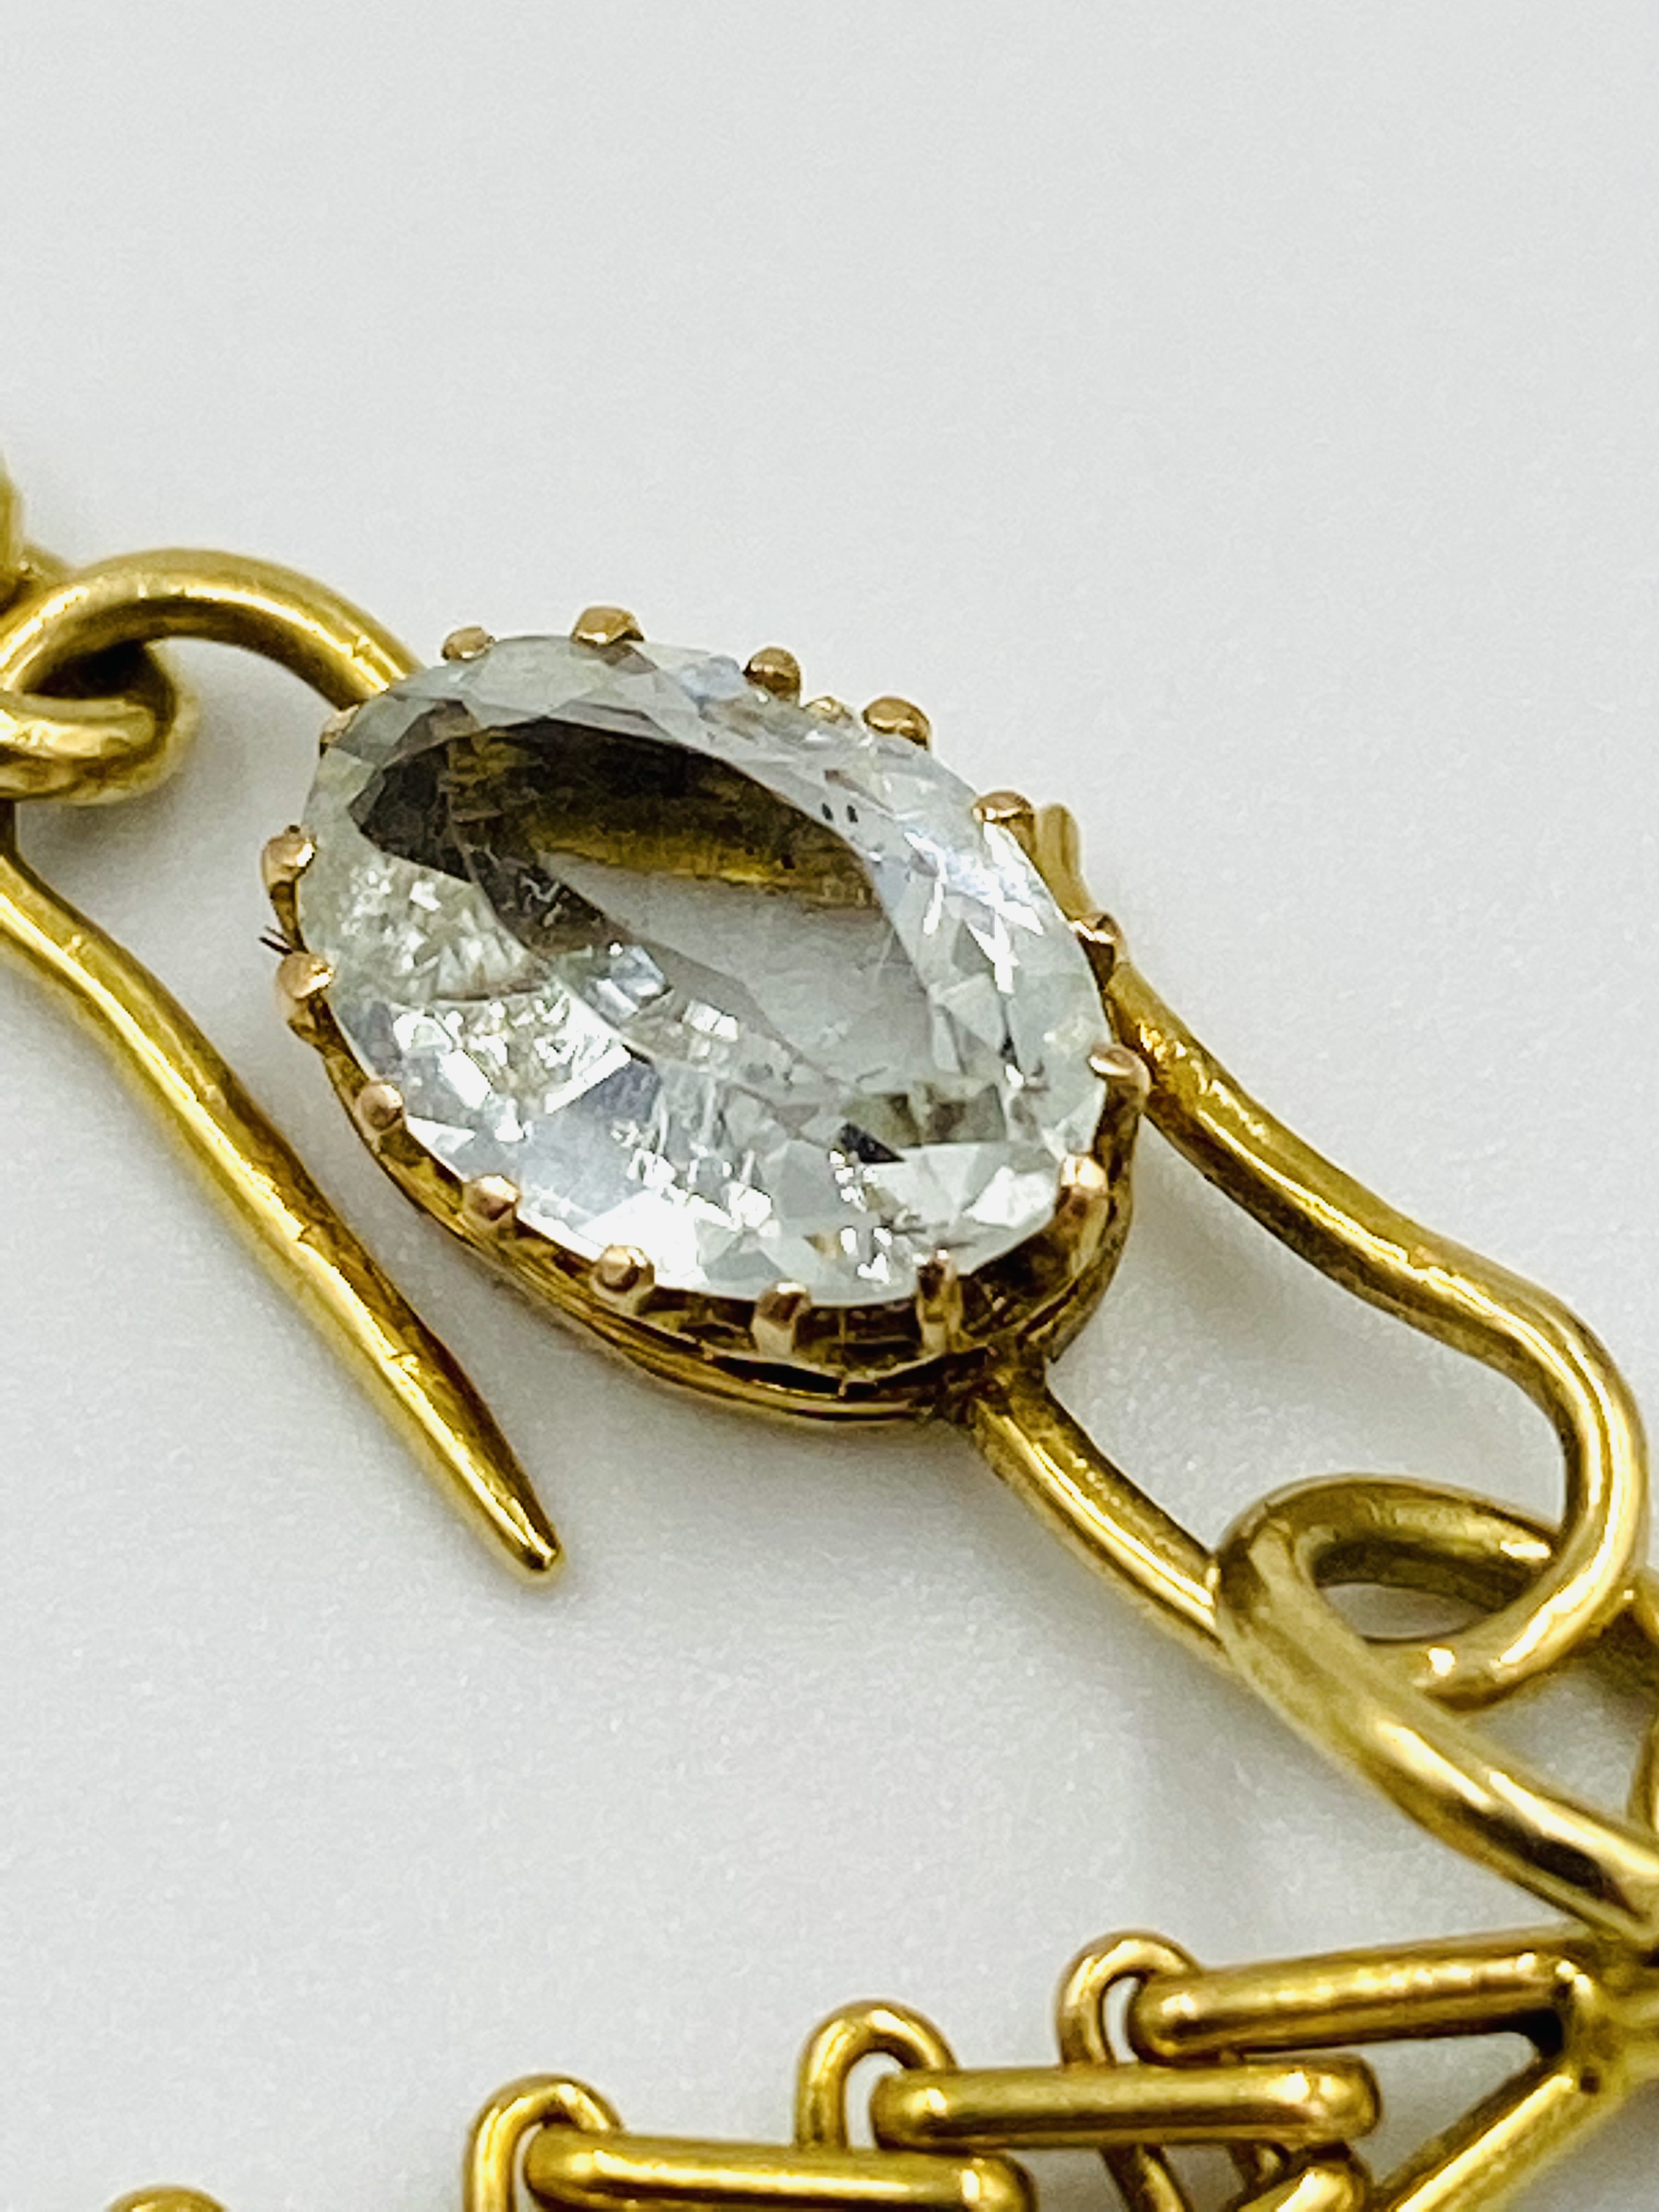 18ct gold and aquamarine necklace by Mrs. Newman - Image 6 of 6